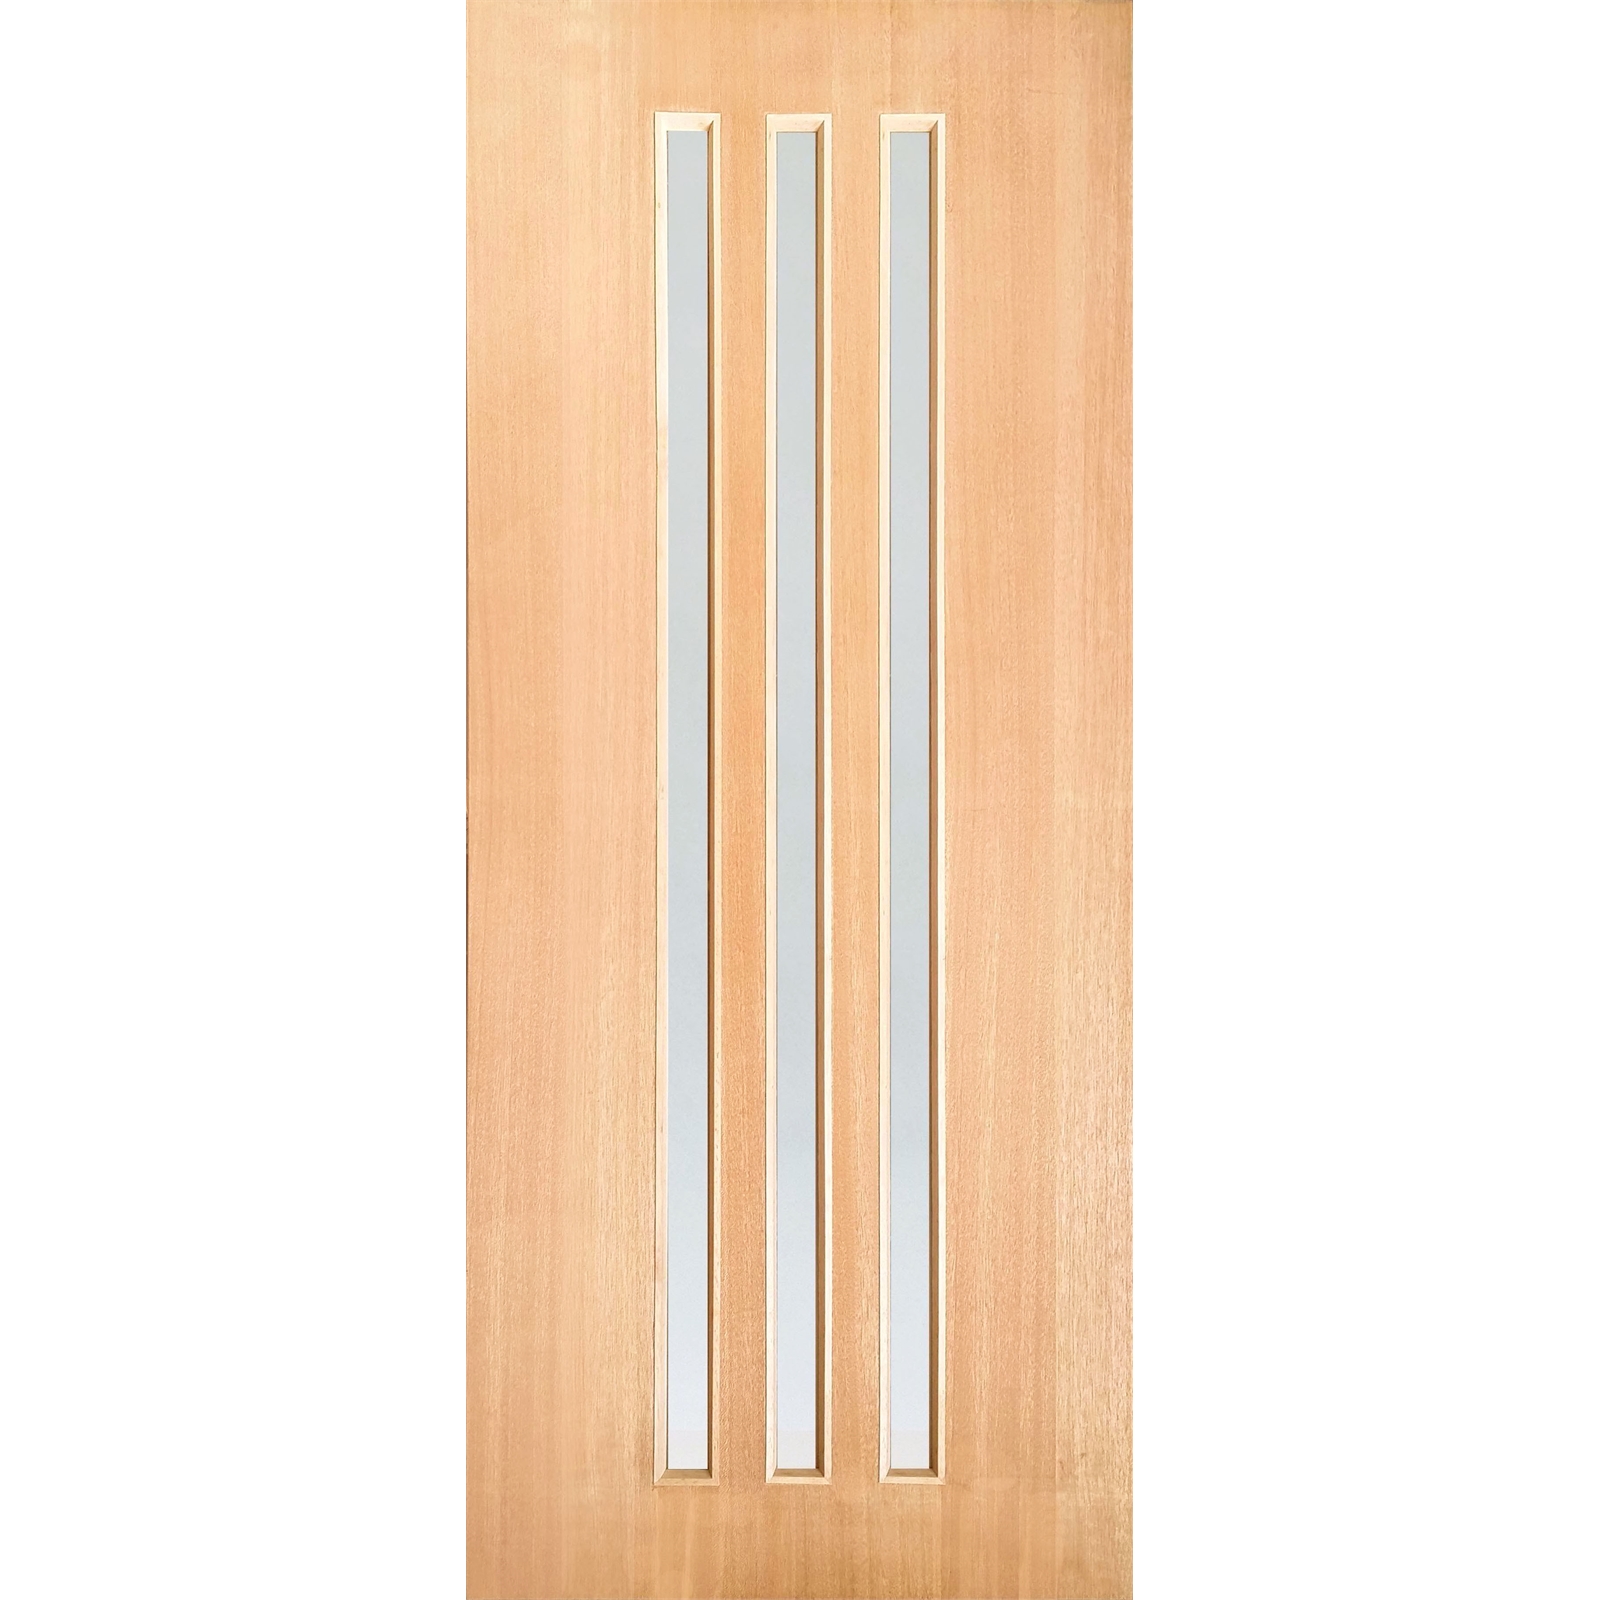 Woodcraft Doors 2040 x 820 x 40mm St Clair SD23 Entrance Door With Frosted Safety Glass